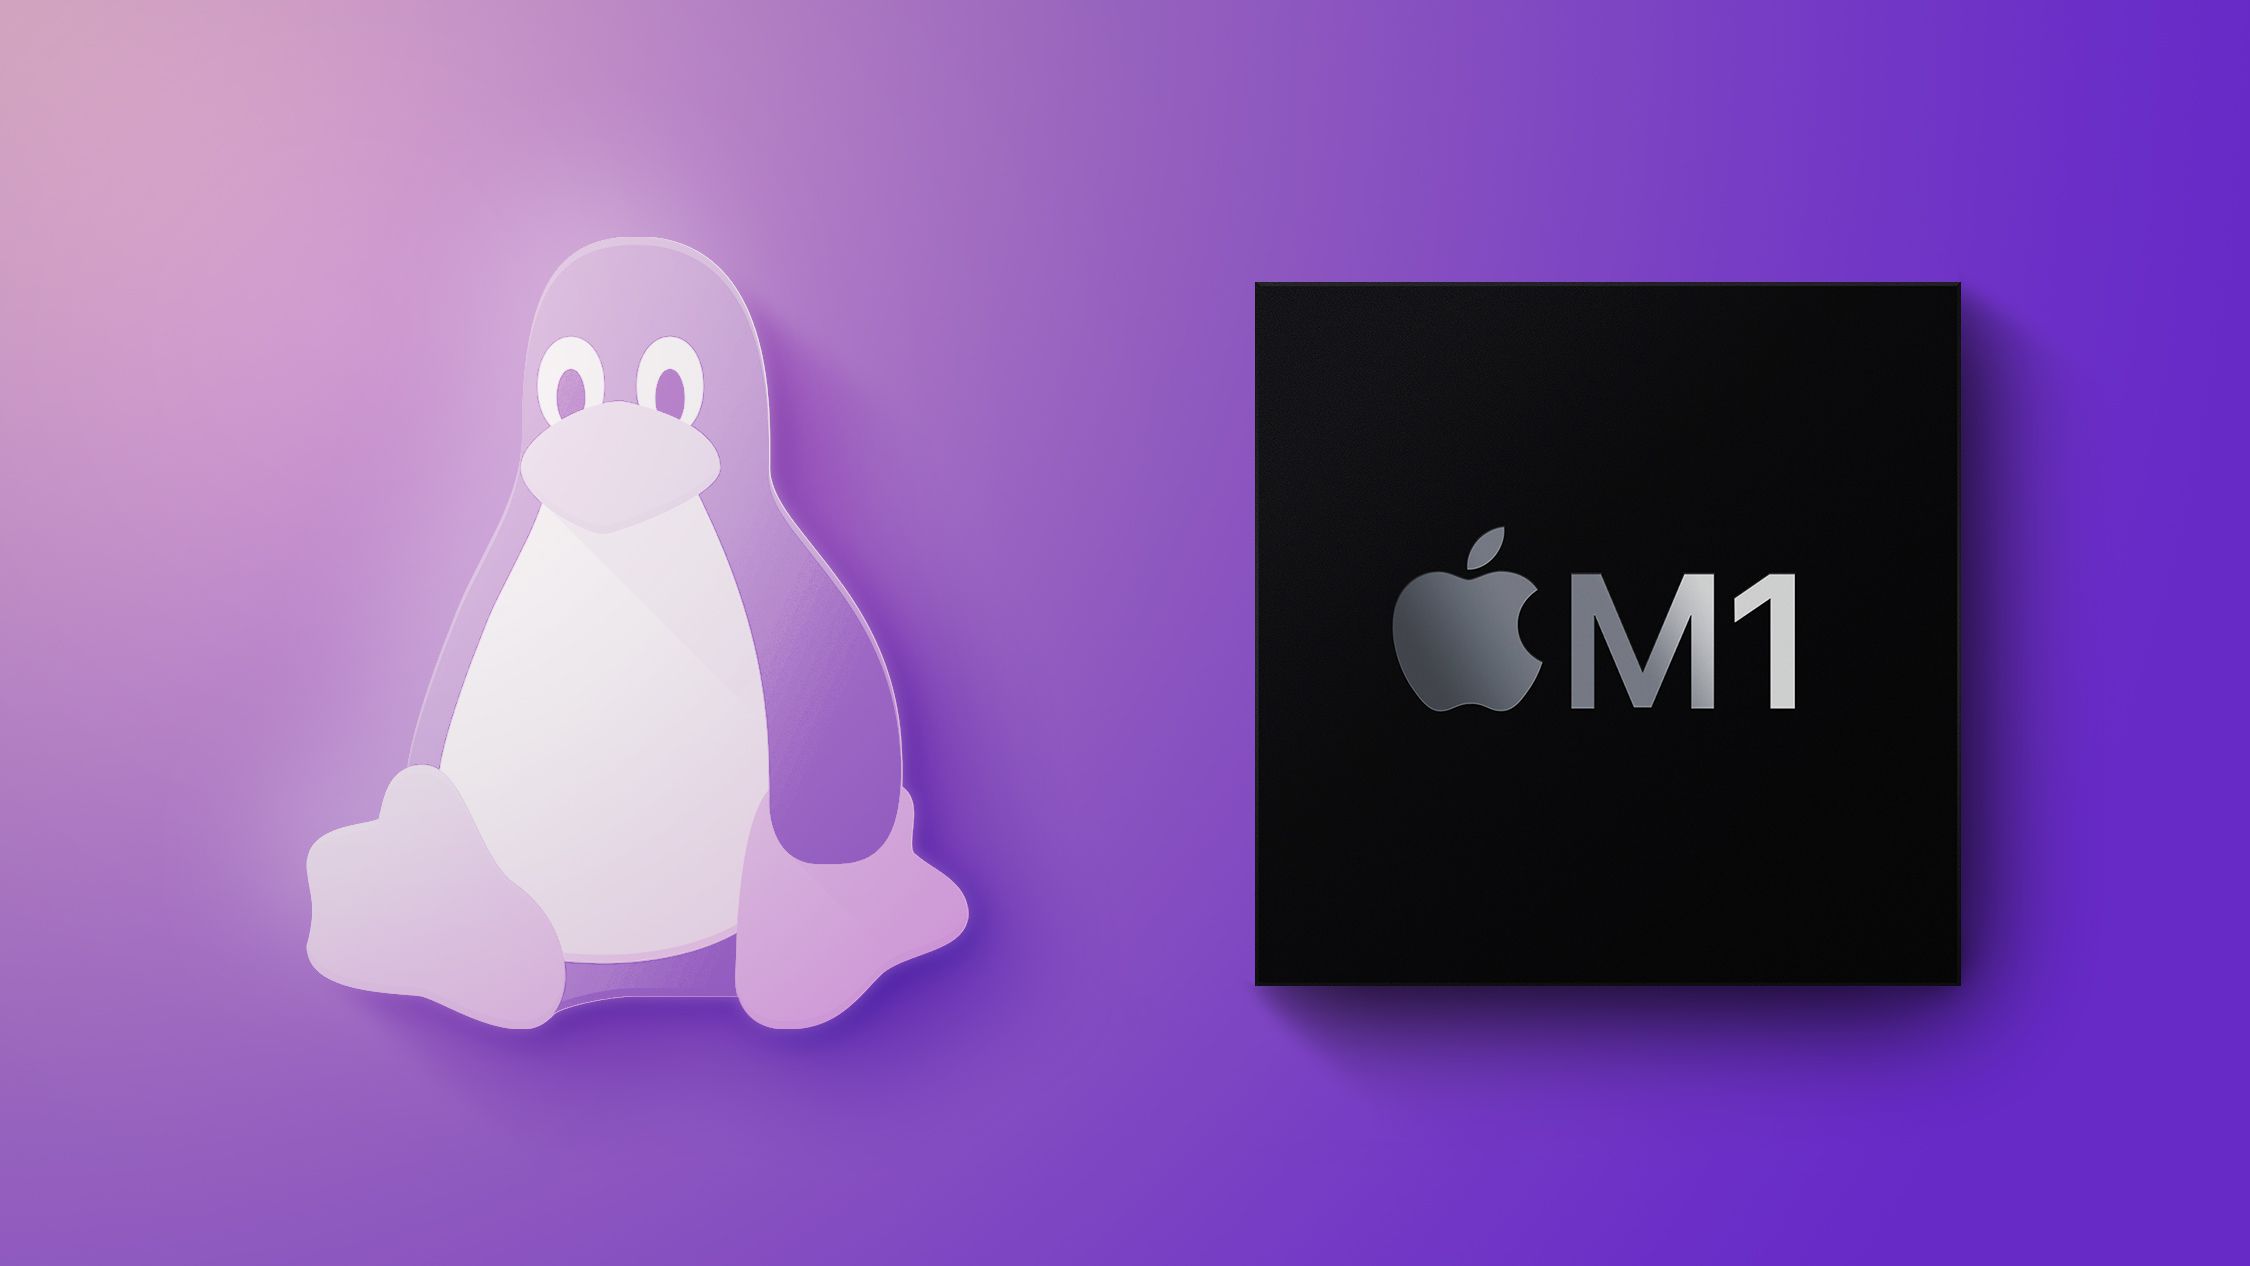 Corellium releases ‘fully usable’ version of Linux for M1 Macs